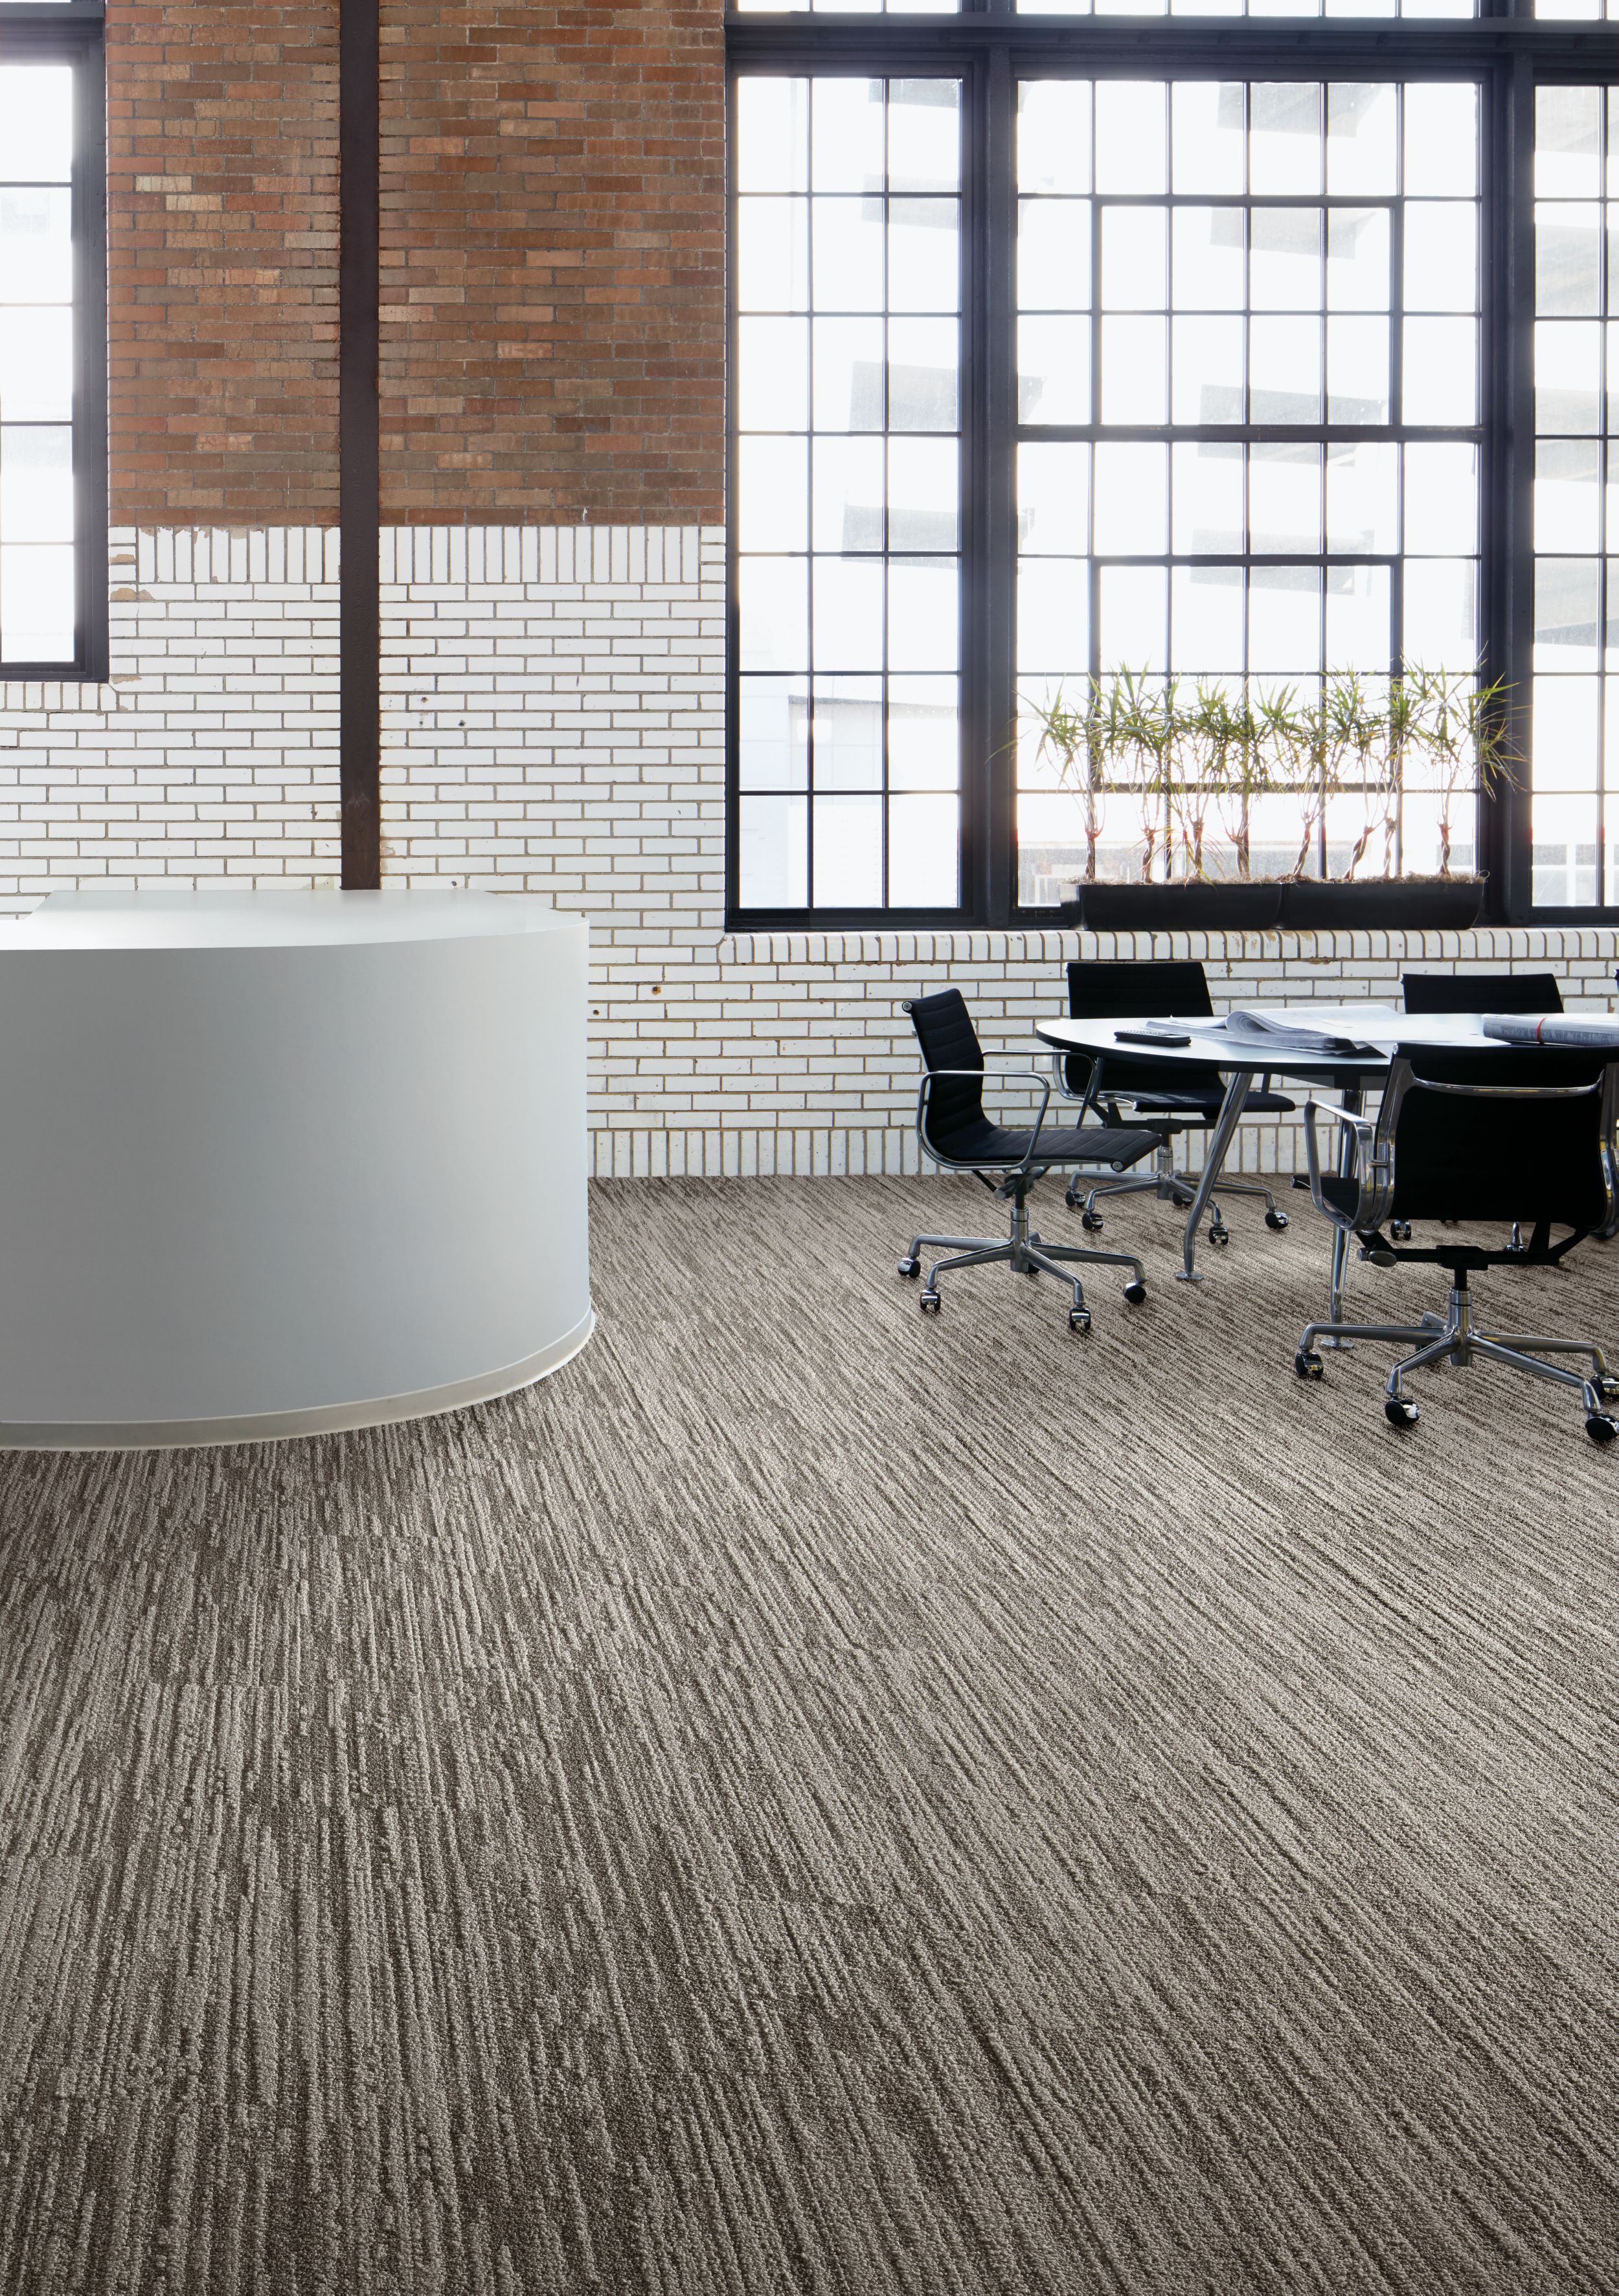 Interface Progression I plank carpet tile in meeting area with four chairs and table numéro d’image 1